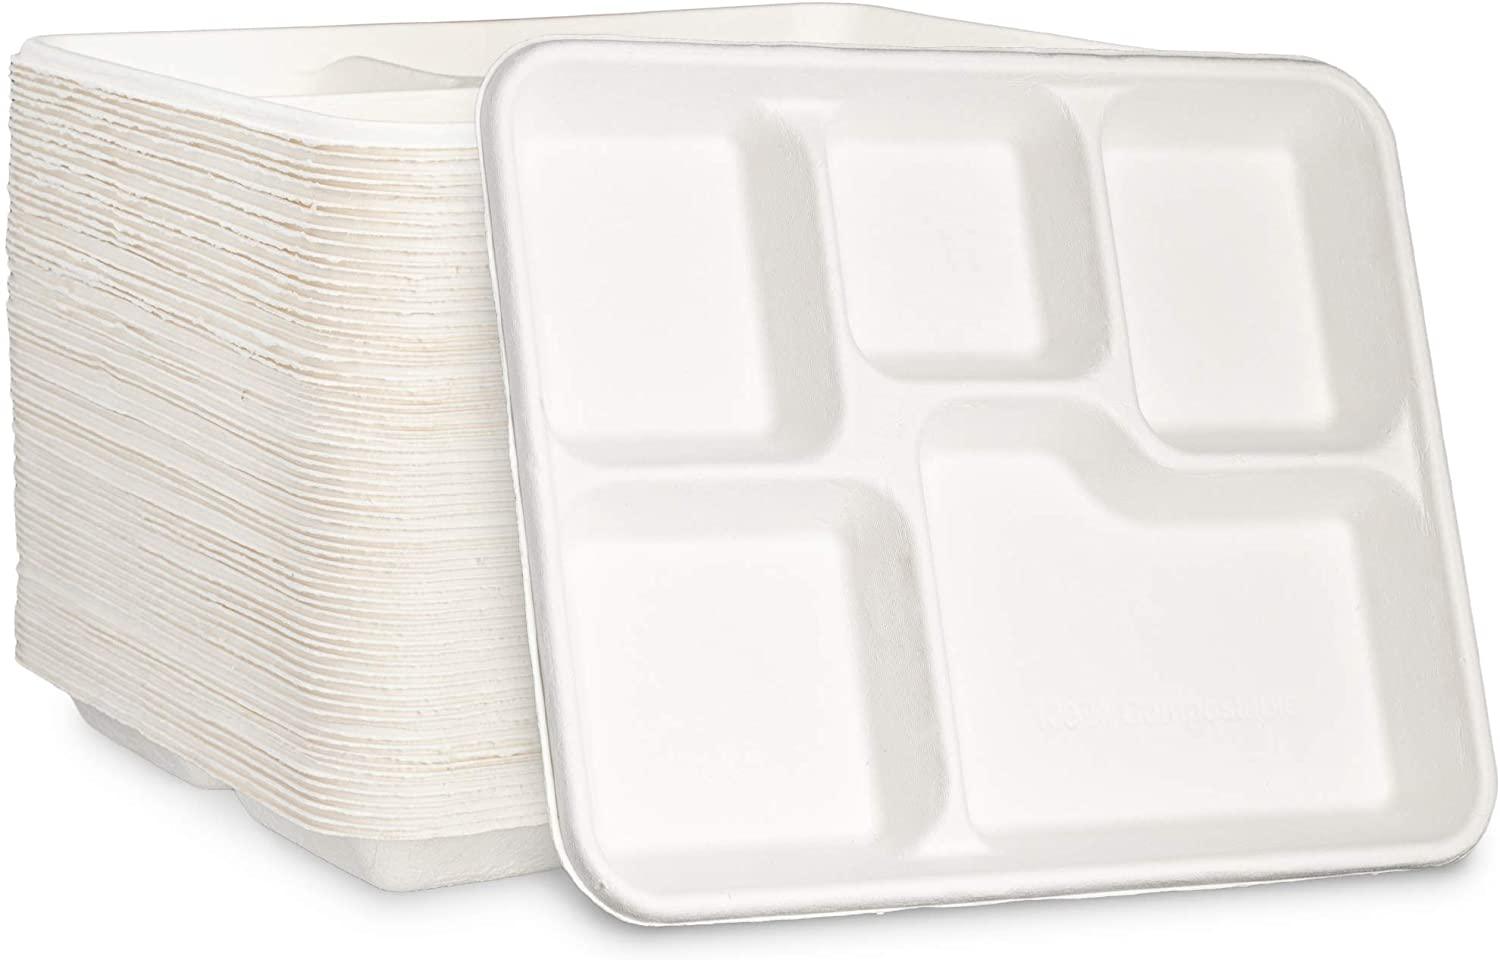 125 Pack |100% Compostable Natural Plant Fiber 5-Compartment Tray - Office Catch